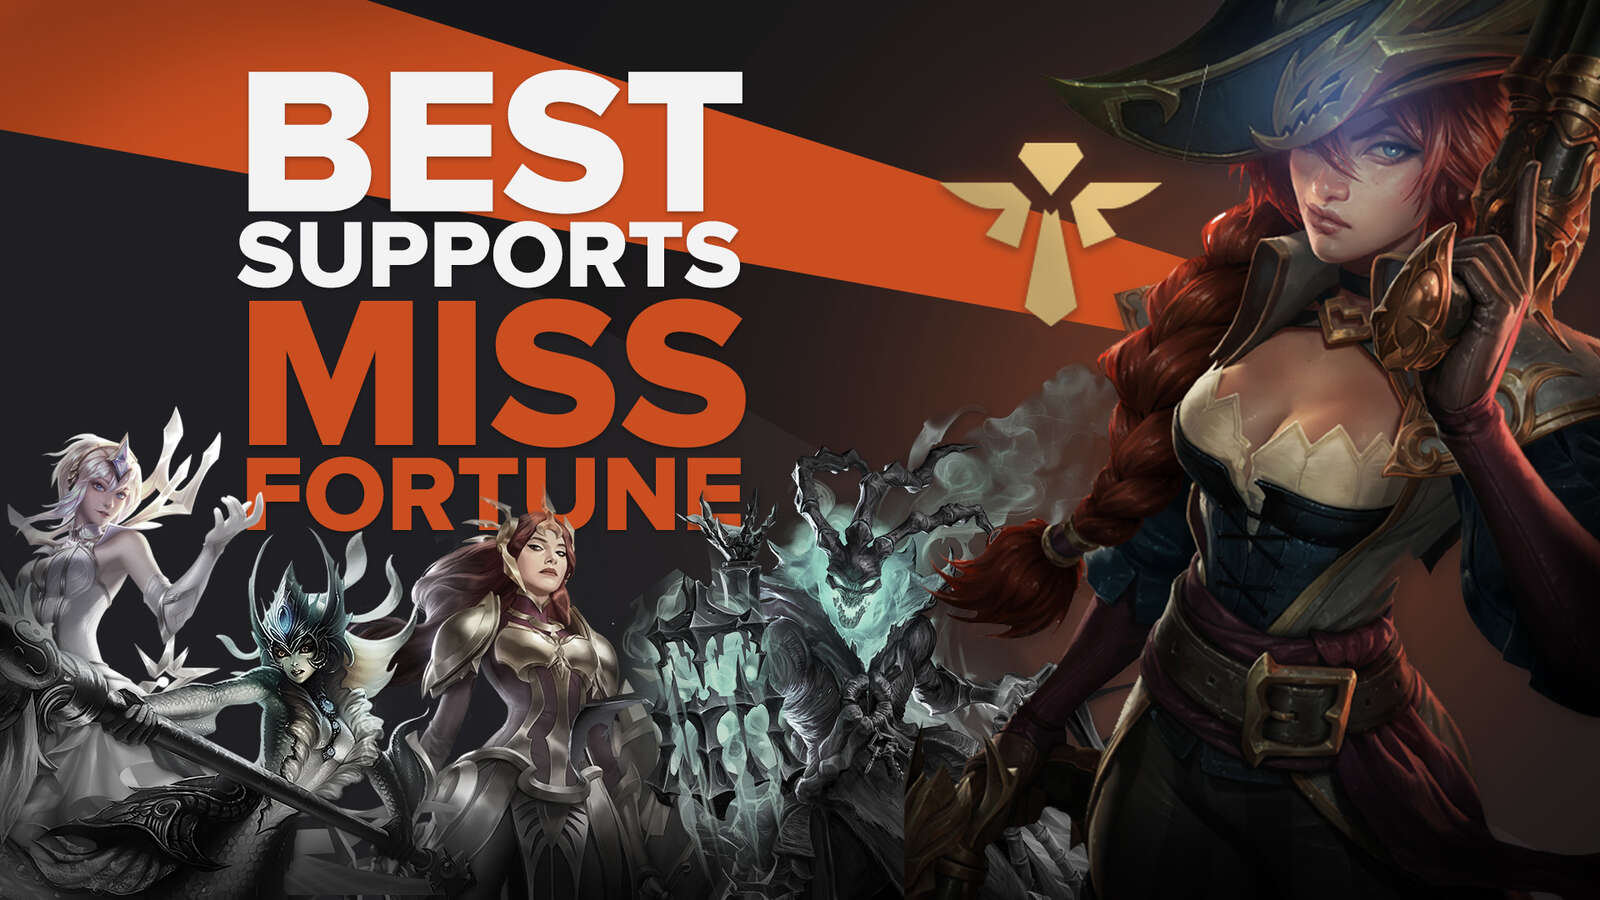 The 6 Best Support Champions For Miss Fortune in LoL